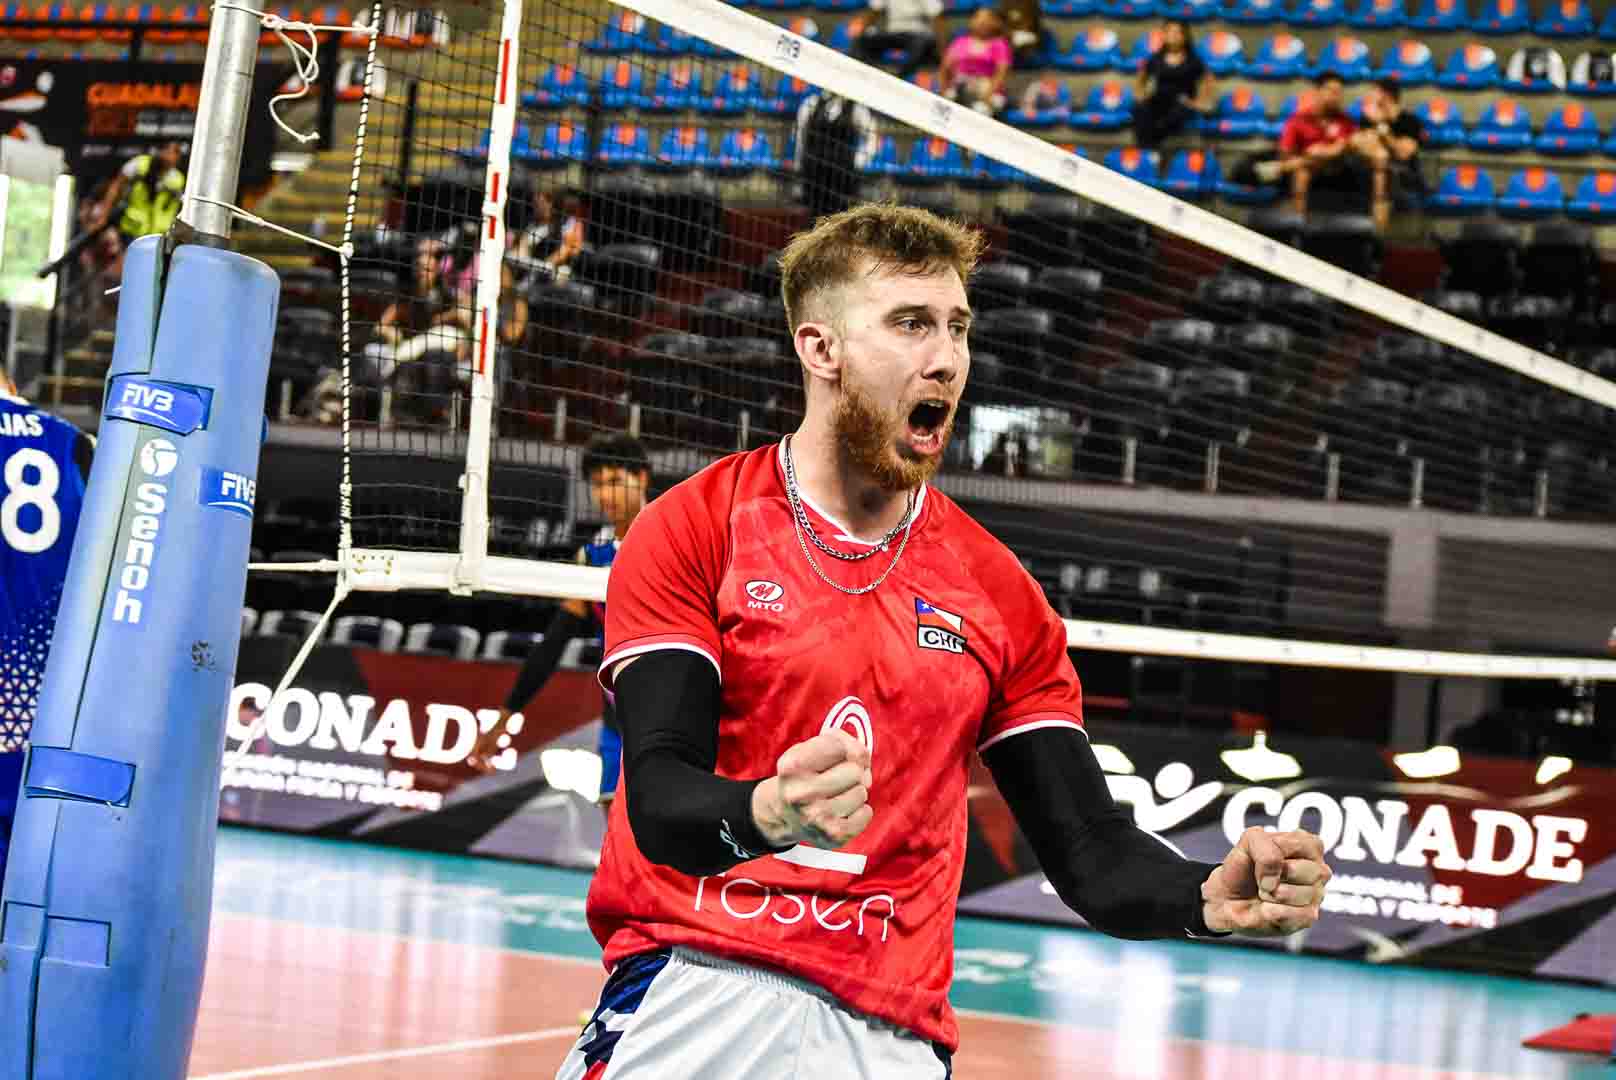 Chile beats Puerto Rico in straight sets 